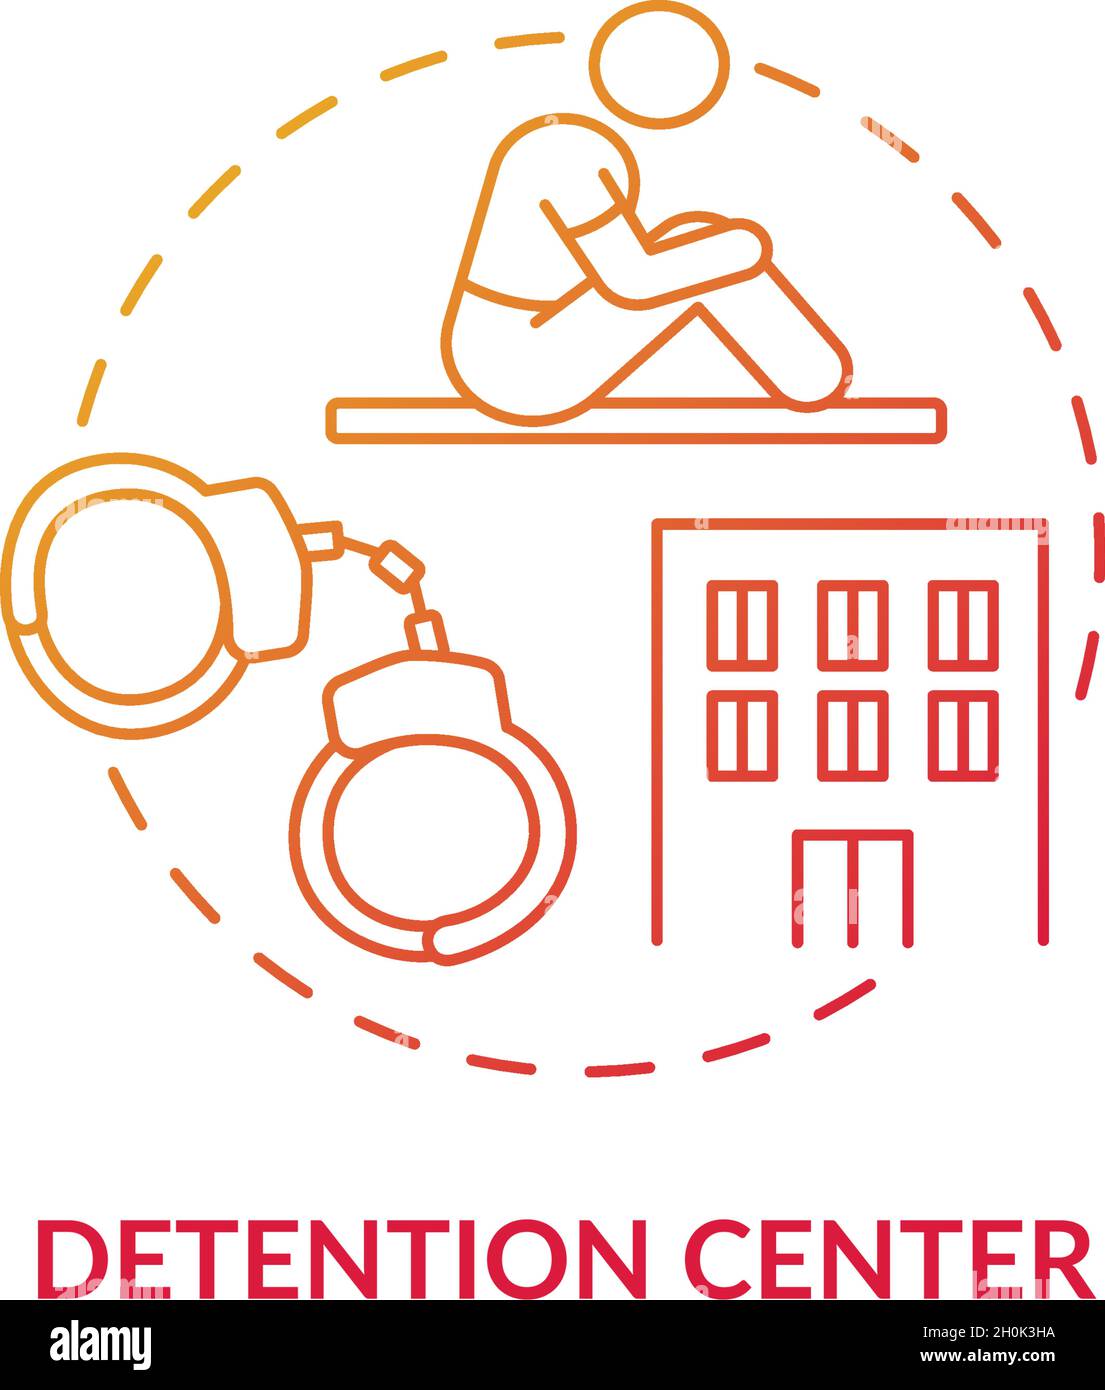 Detention center red concept icon Stock Vector